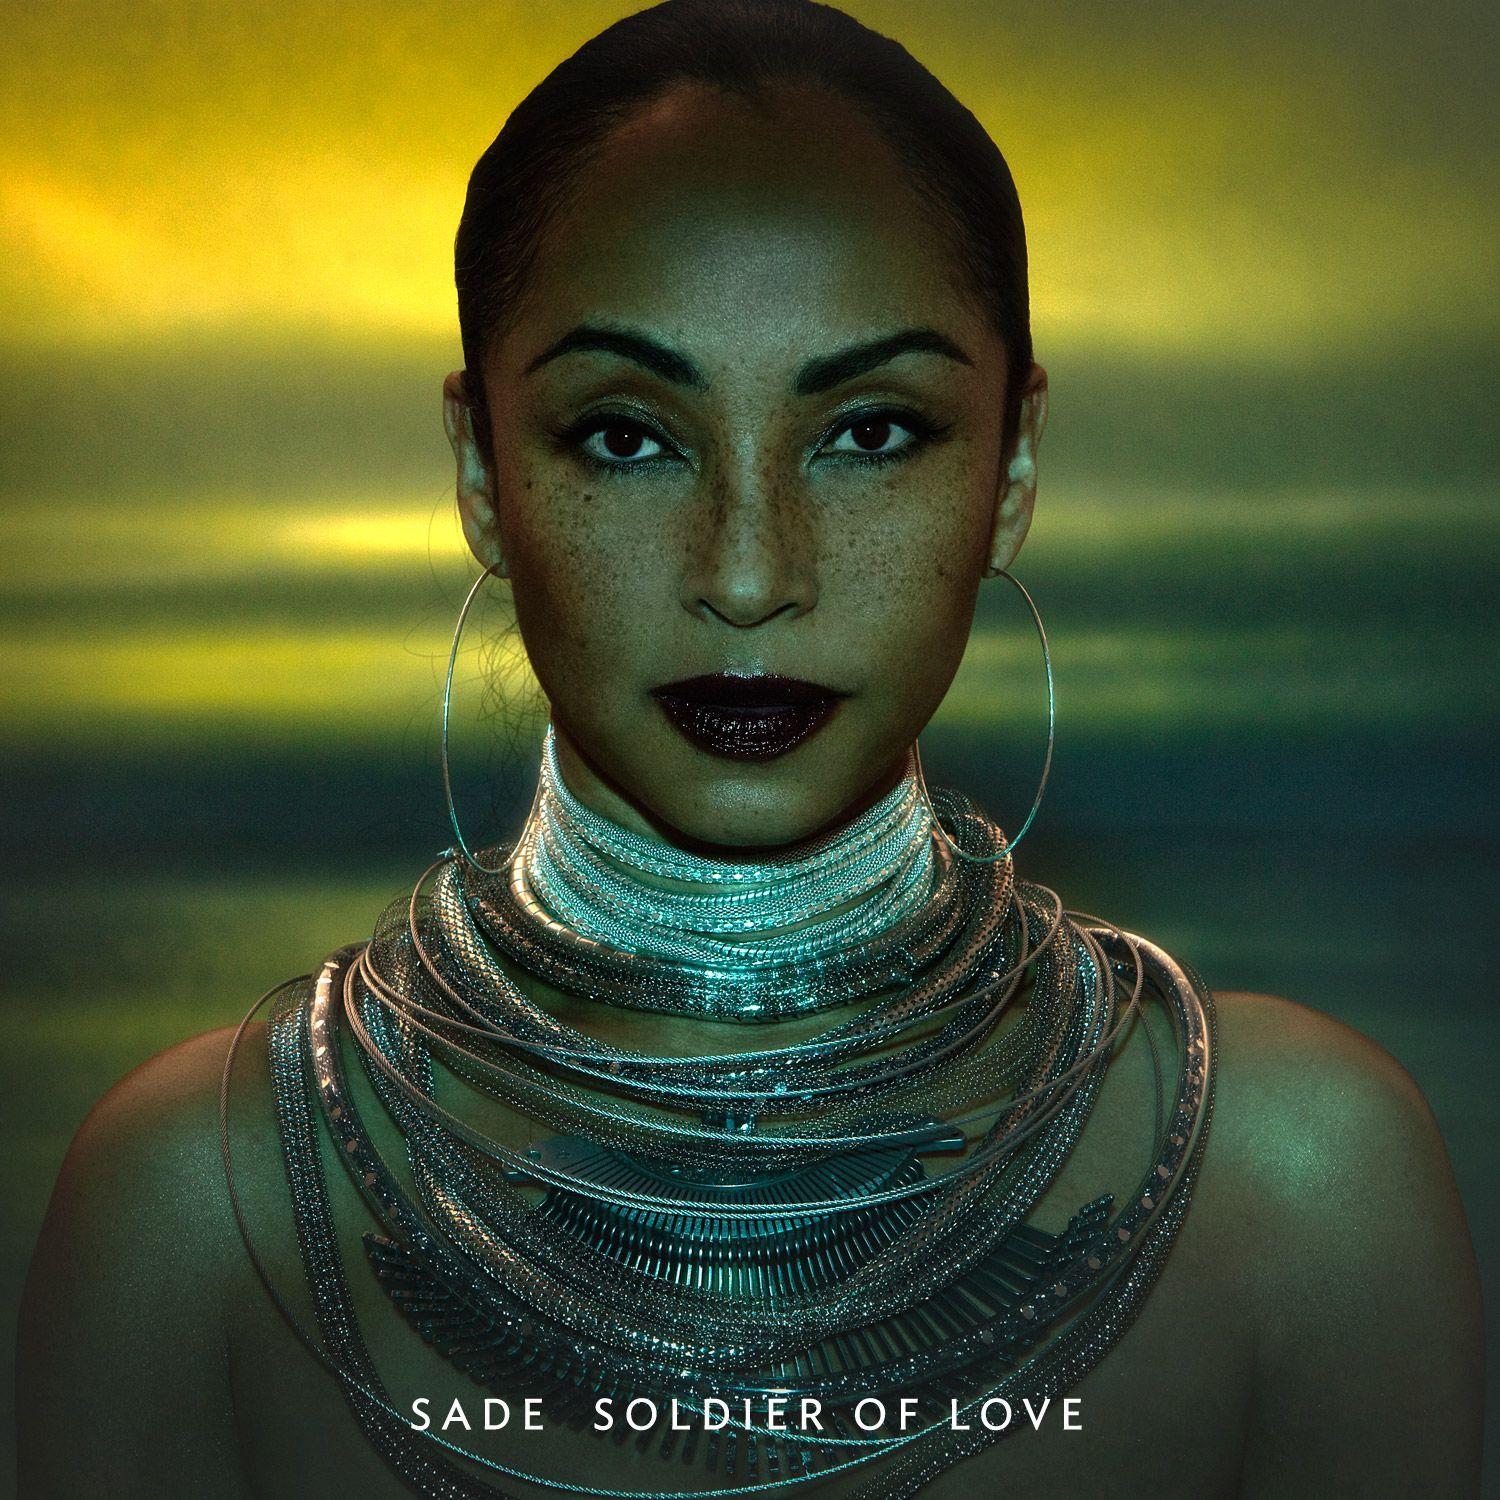 The smooth sounds of the group Sade (led by vocalist Sade Adu) have